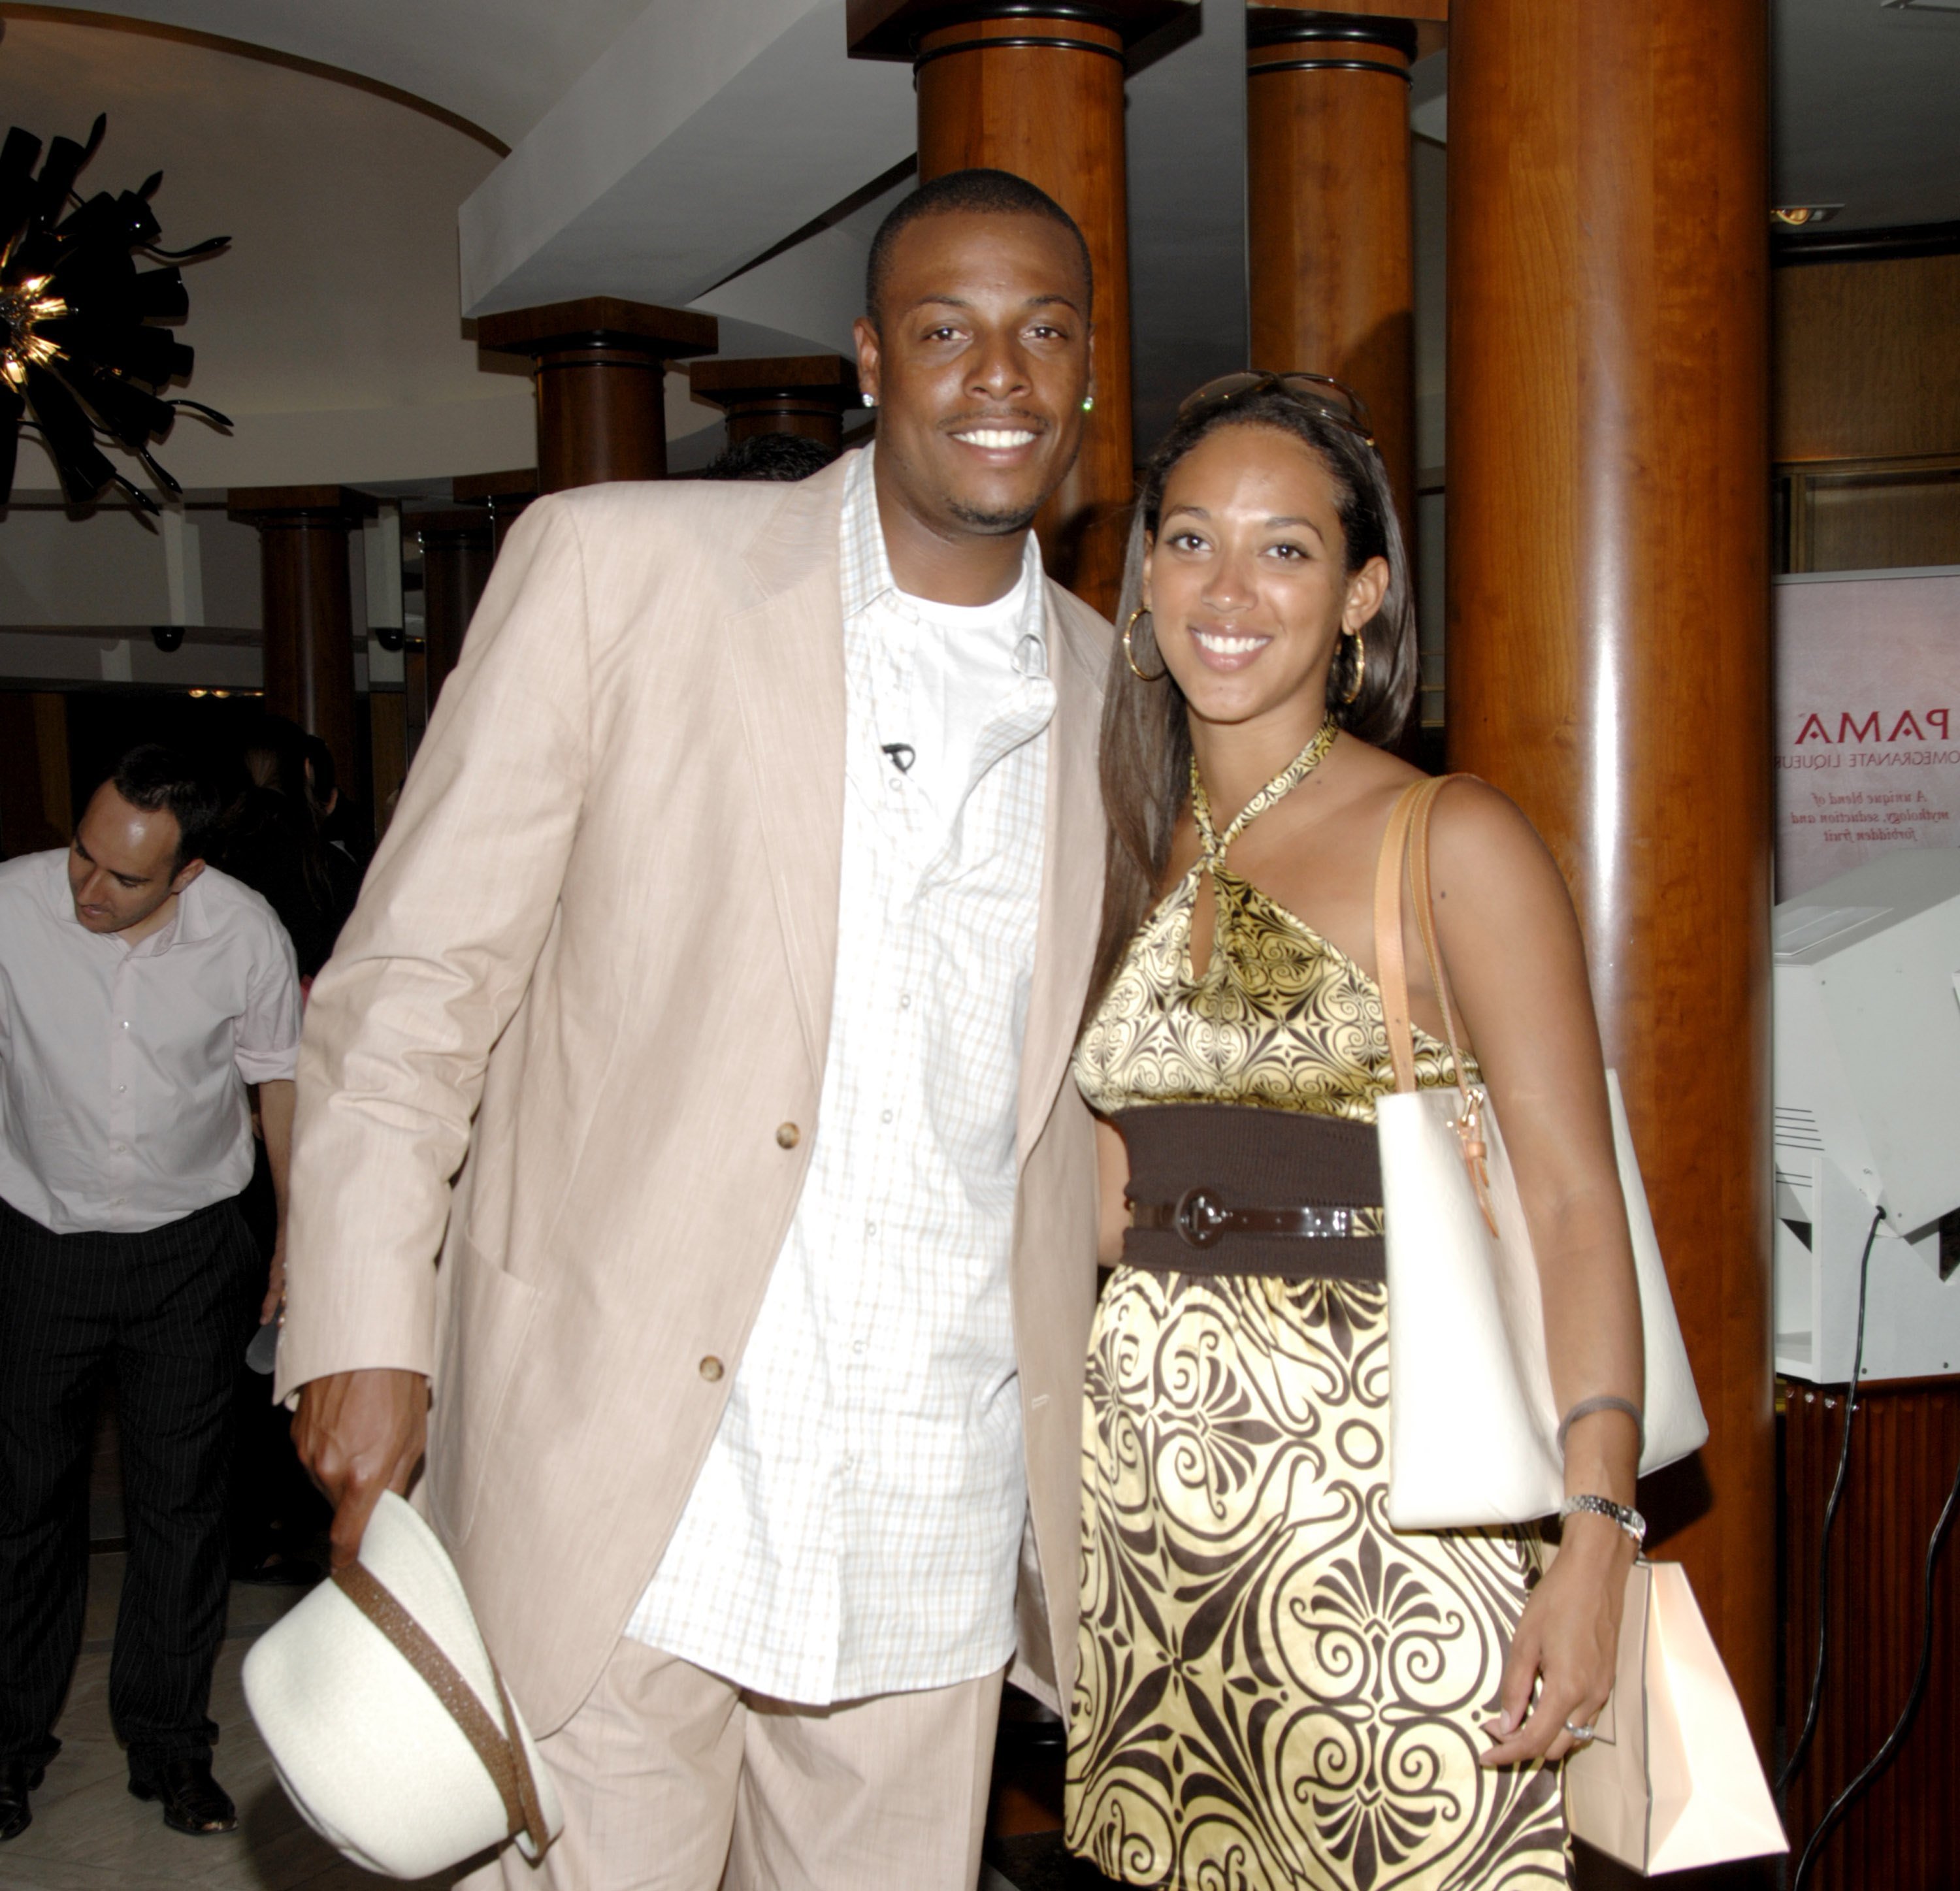 Paul Pierce and Julie Landrum pose together for photo at LA Stars Charity Foundation Party in Beverly Hills